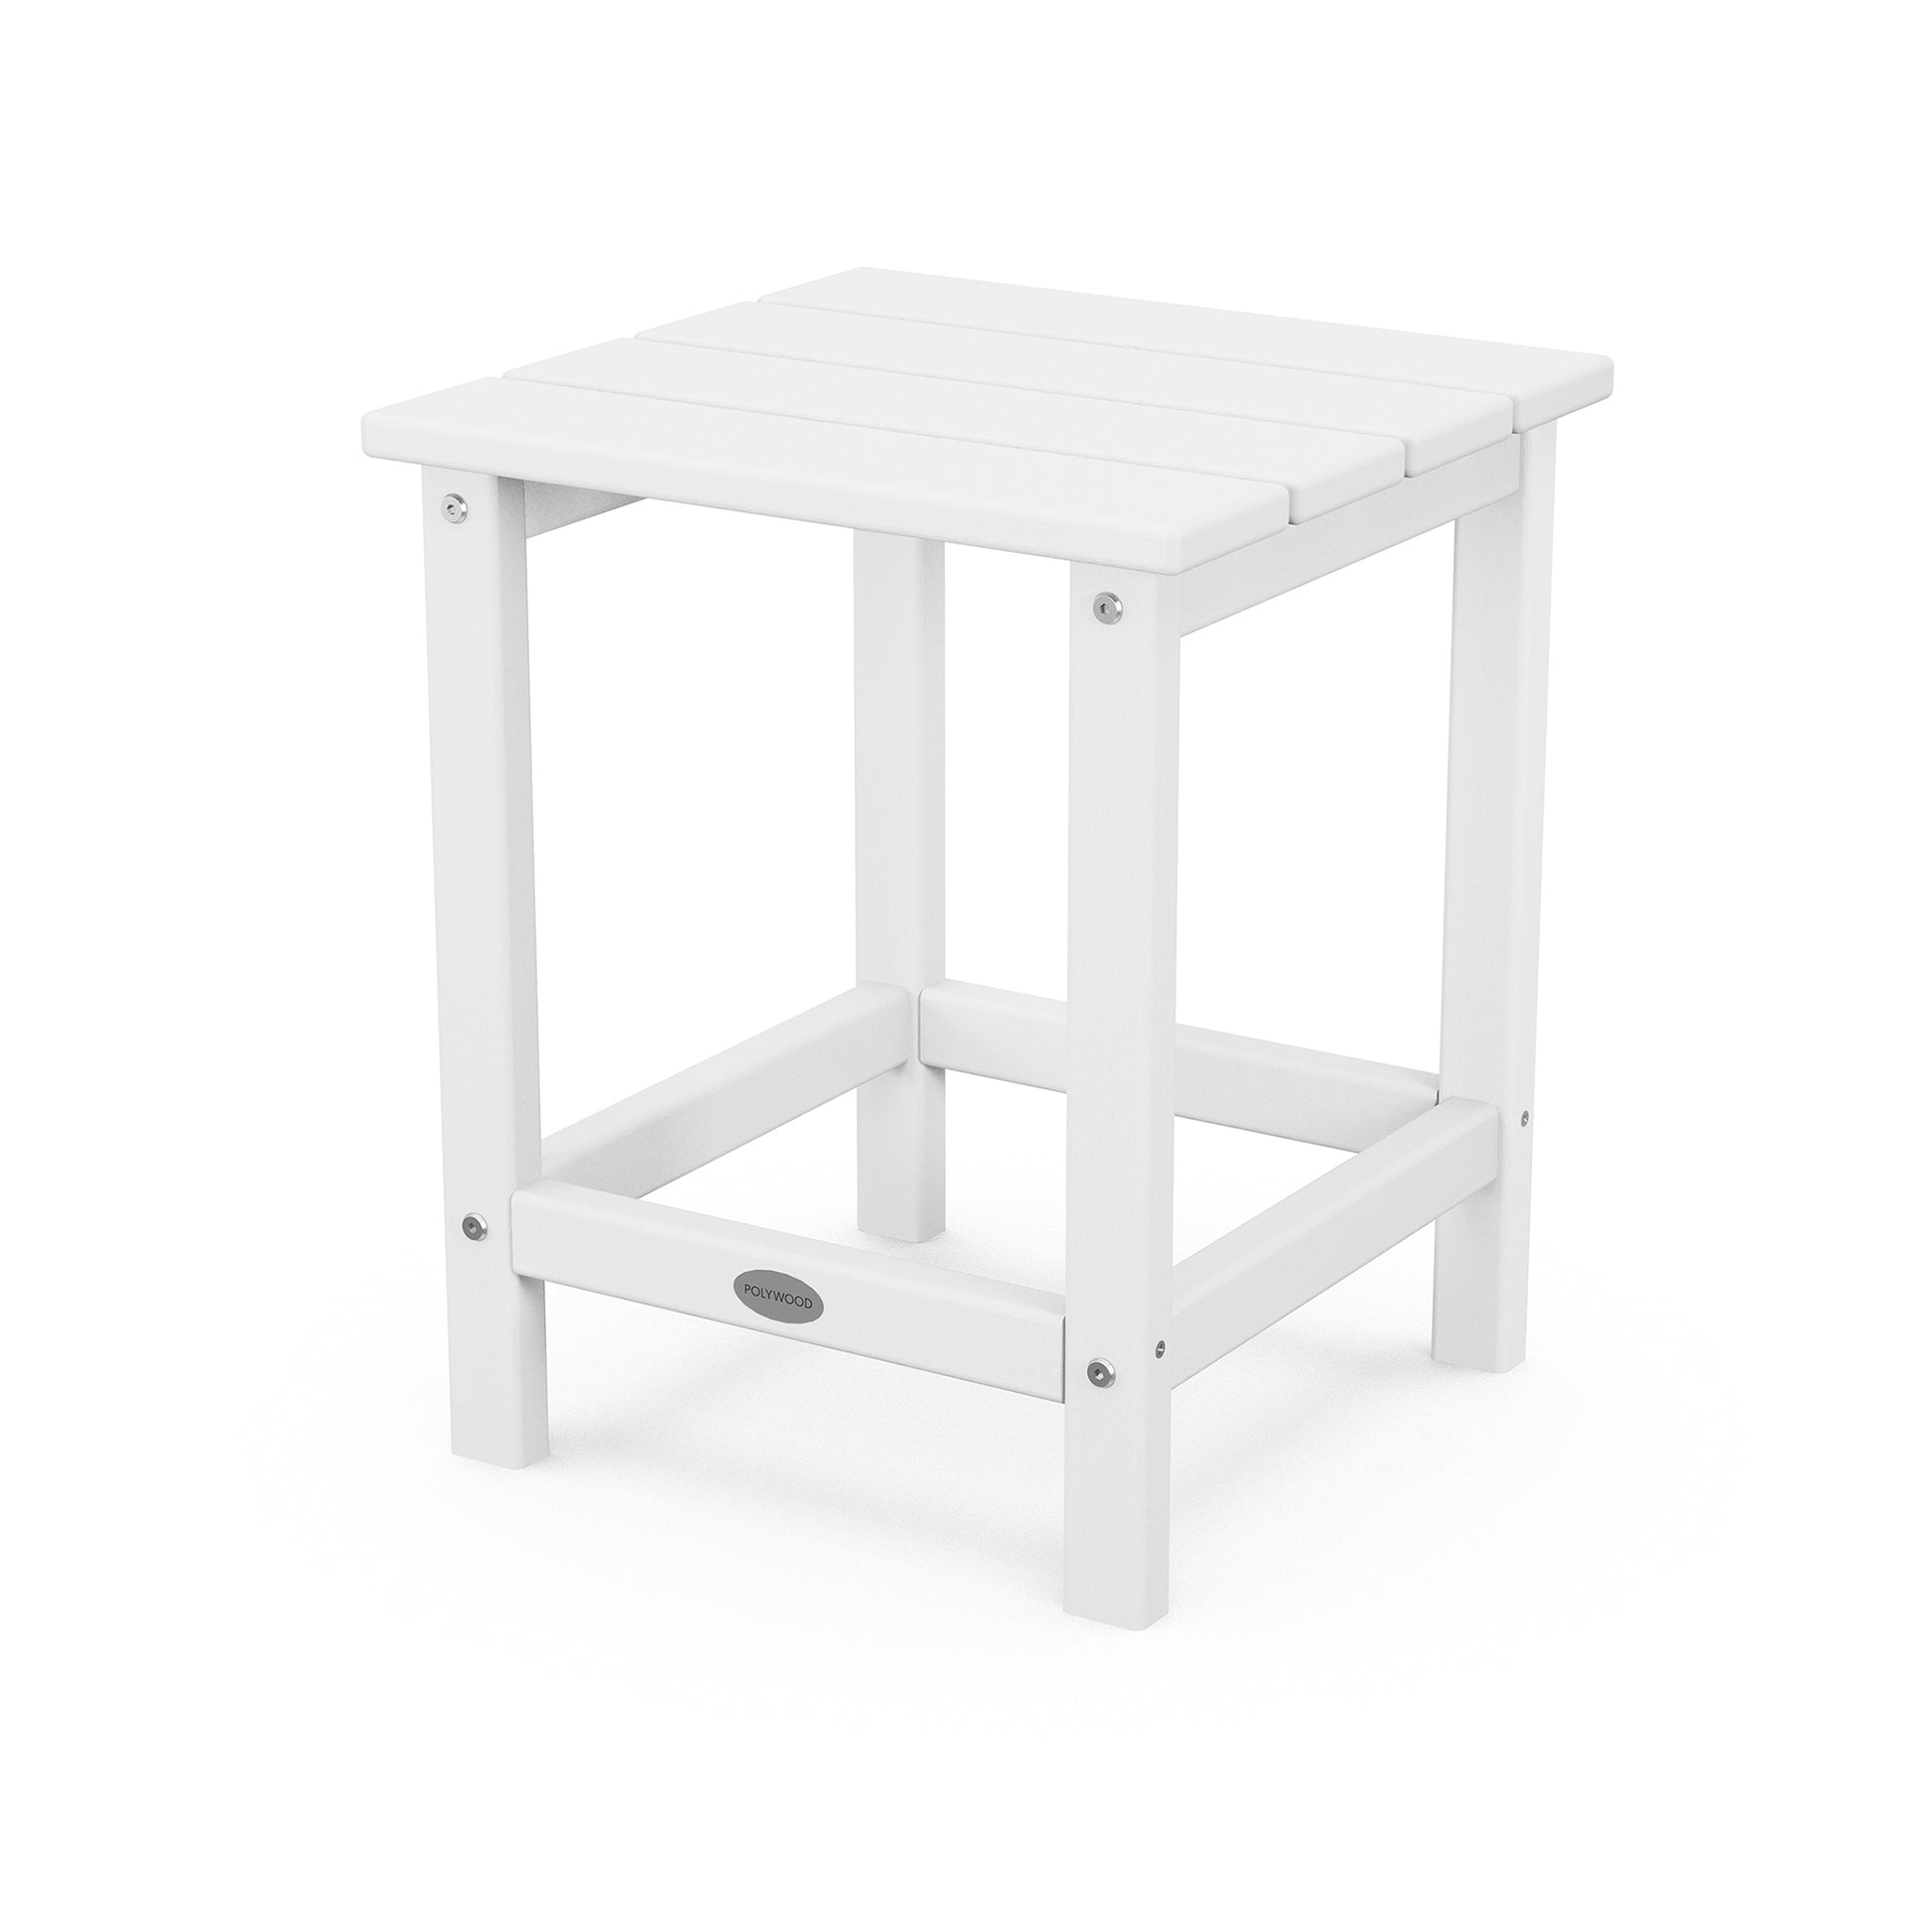 A simple, white POLYWOOD Long Island 18" side table with a square top and a lower shelf, isolated on a white background. The table features visible joints and a small, round logo on the lower frame.